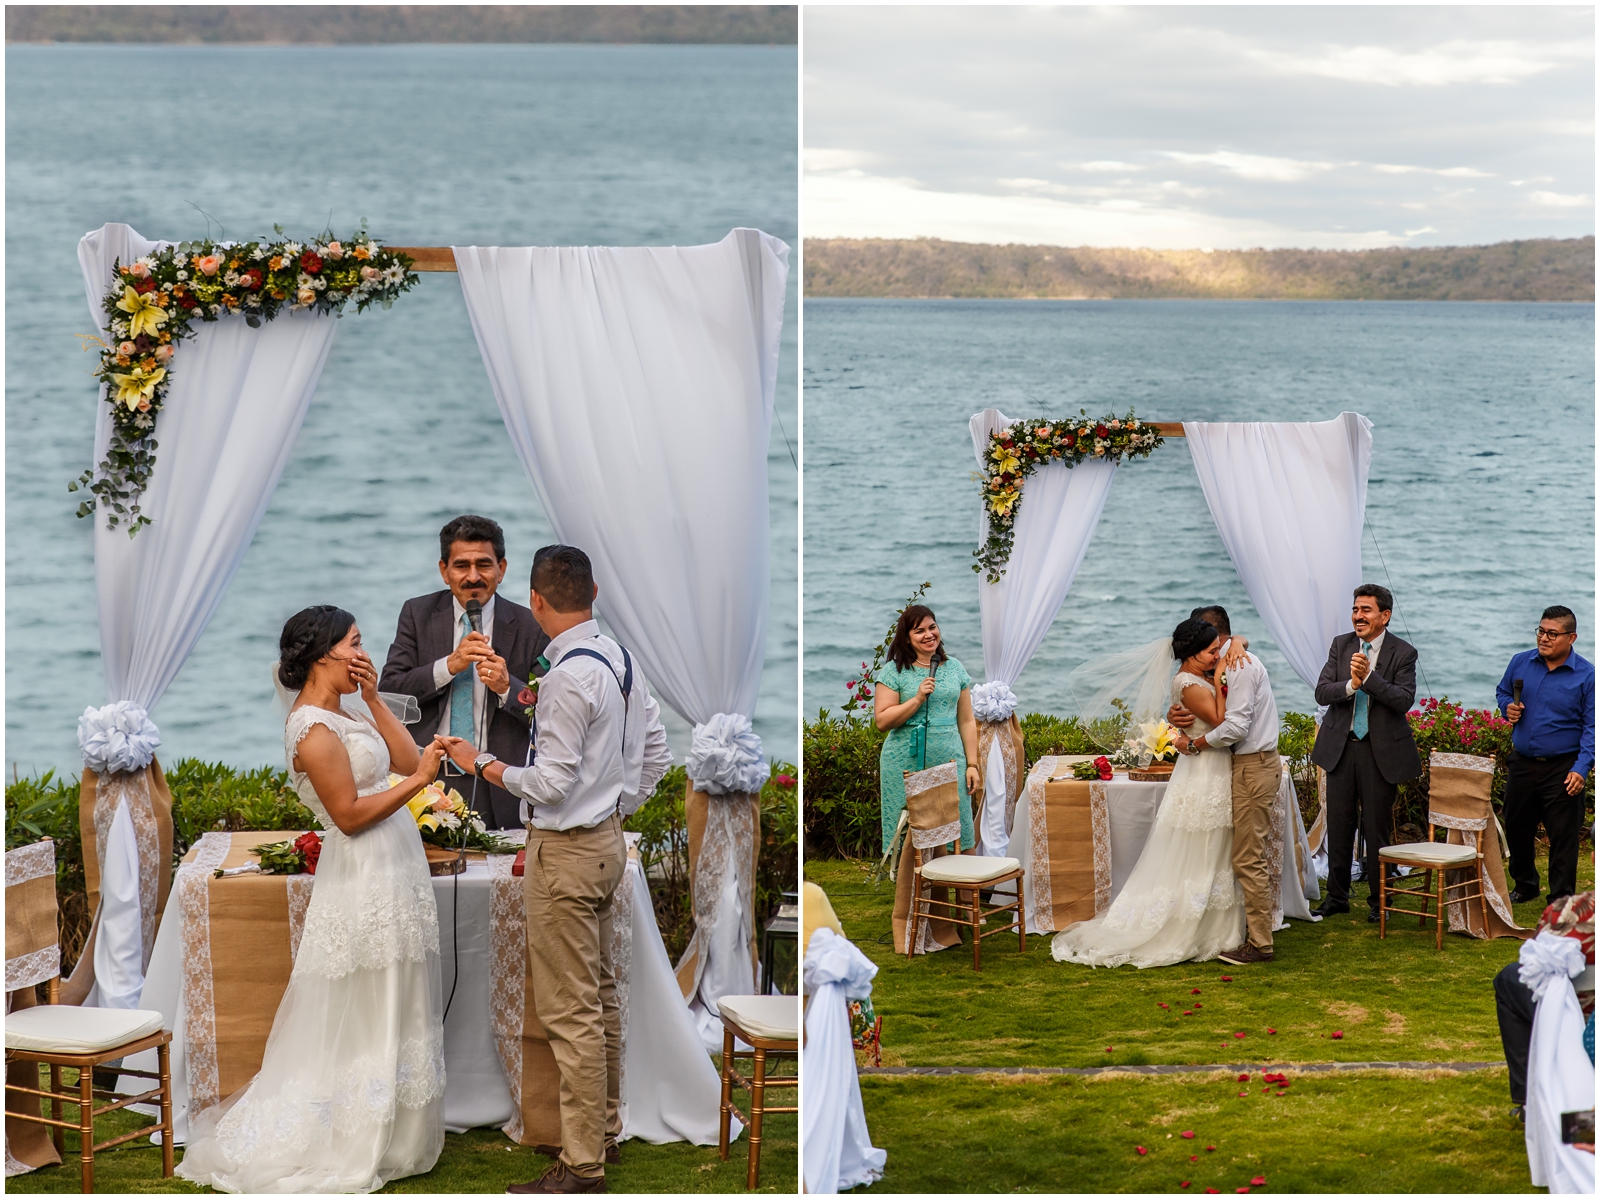 Small destination wedding on a lake in Nicaragua.